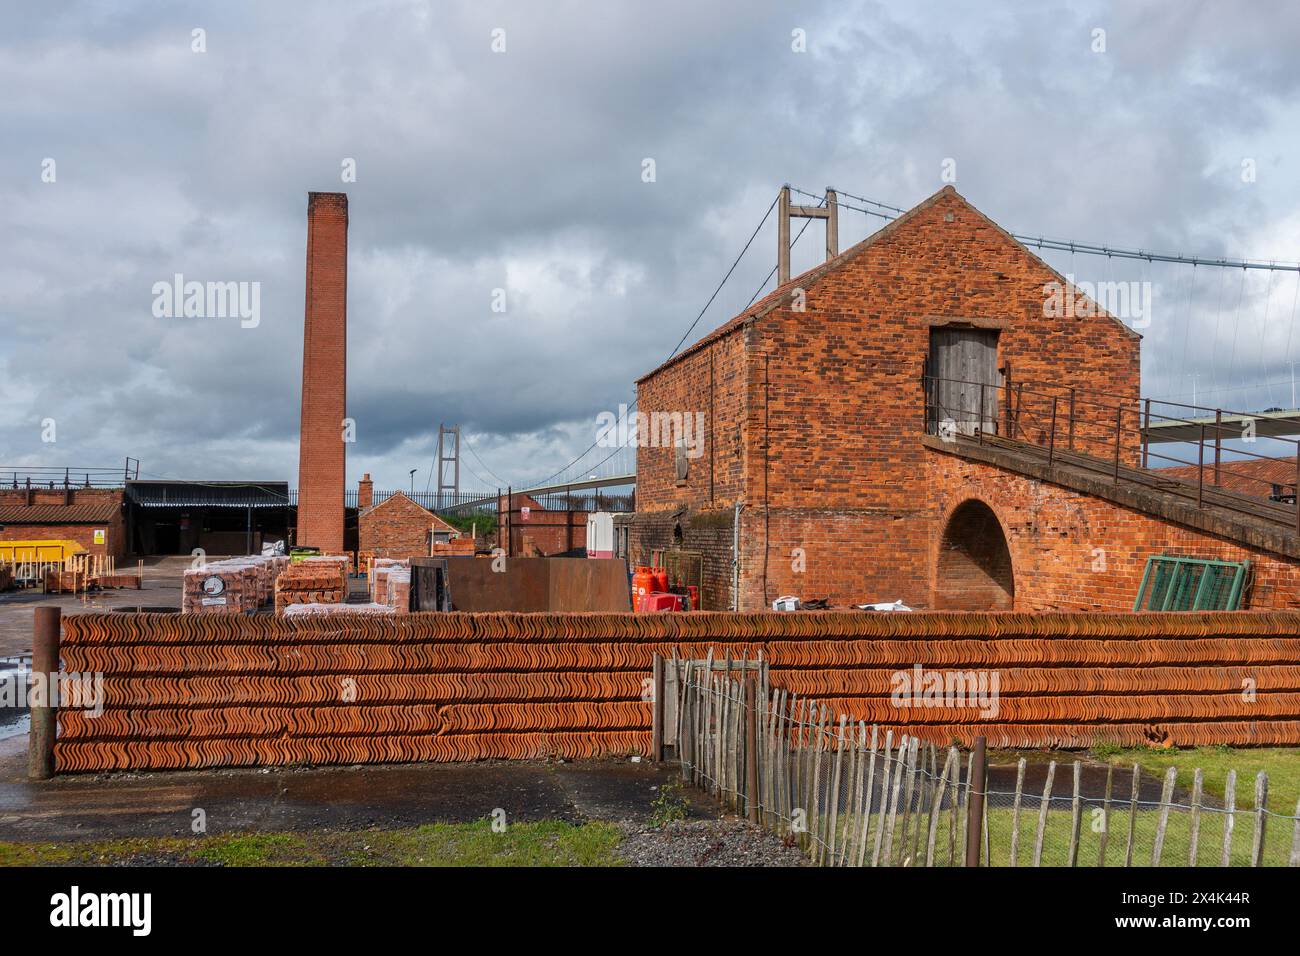 The Old Tile Works,William Blyth’s Tile Yard is one of the few remaining tile works in the UK still using traditional production methods. Blyth’s Tile Stock Photo